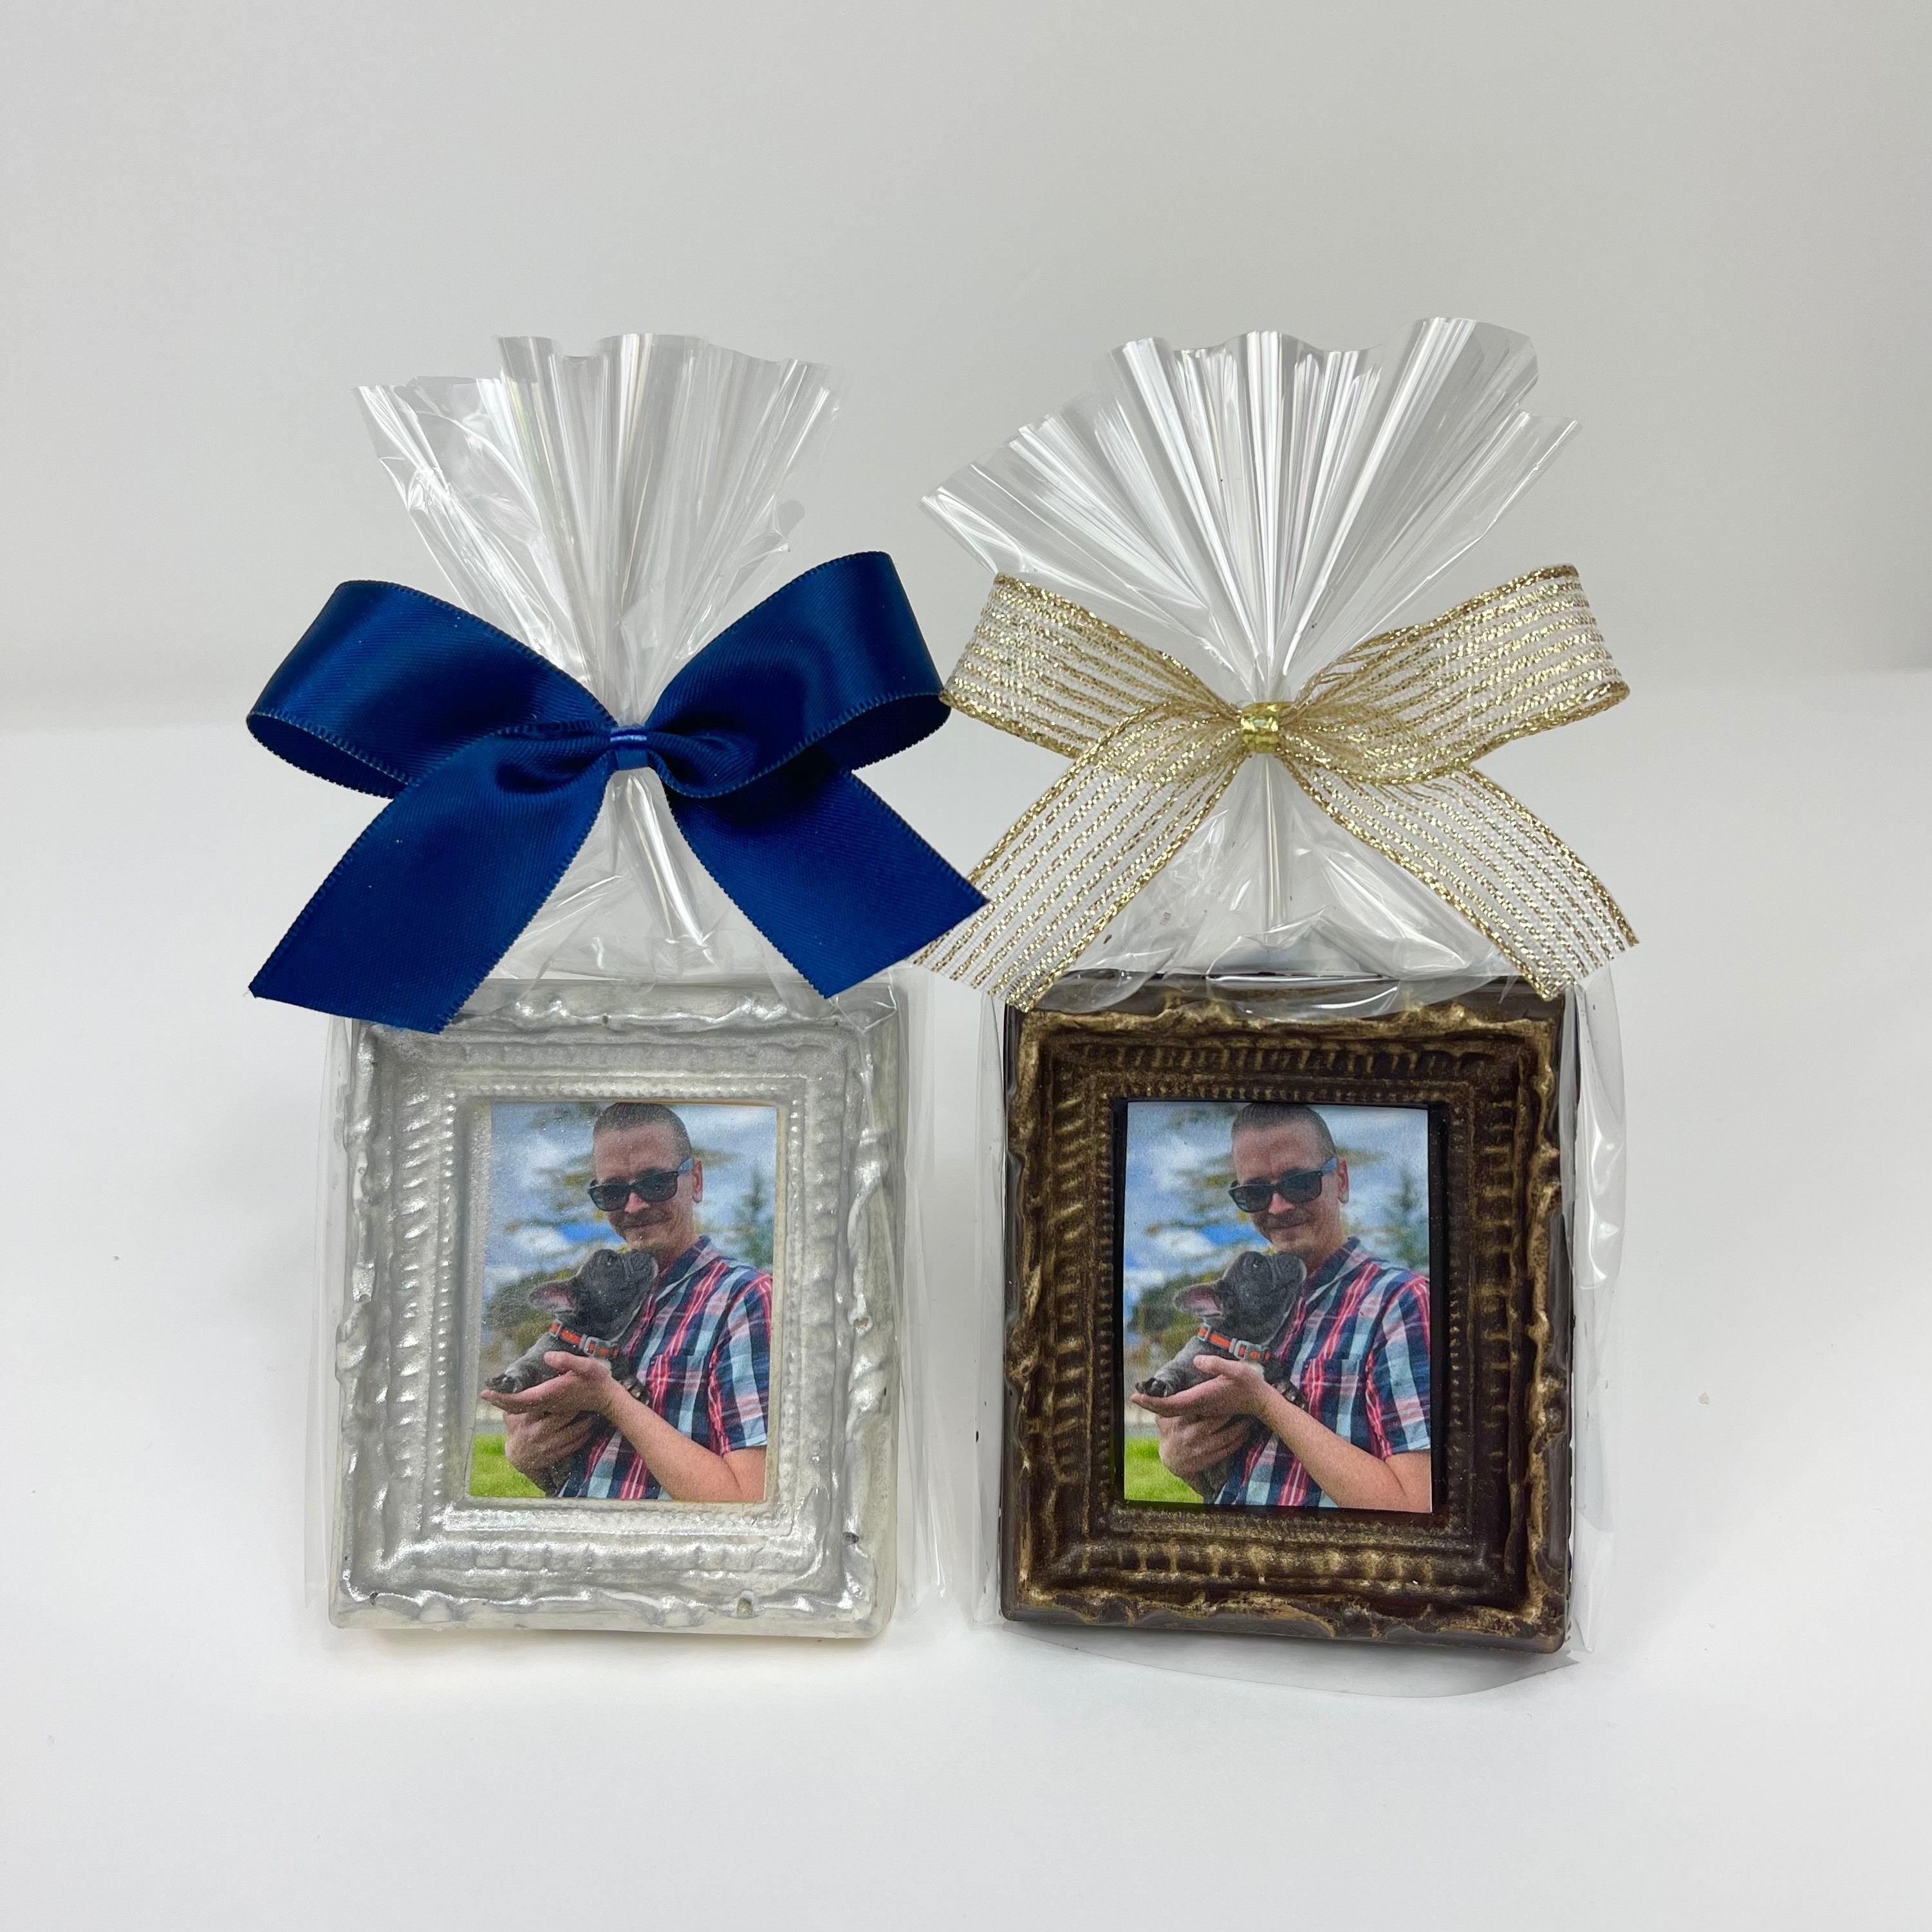 Small White Chocolate Edible Image Frame wrapped in cellophane with a ribbo